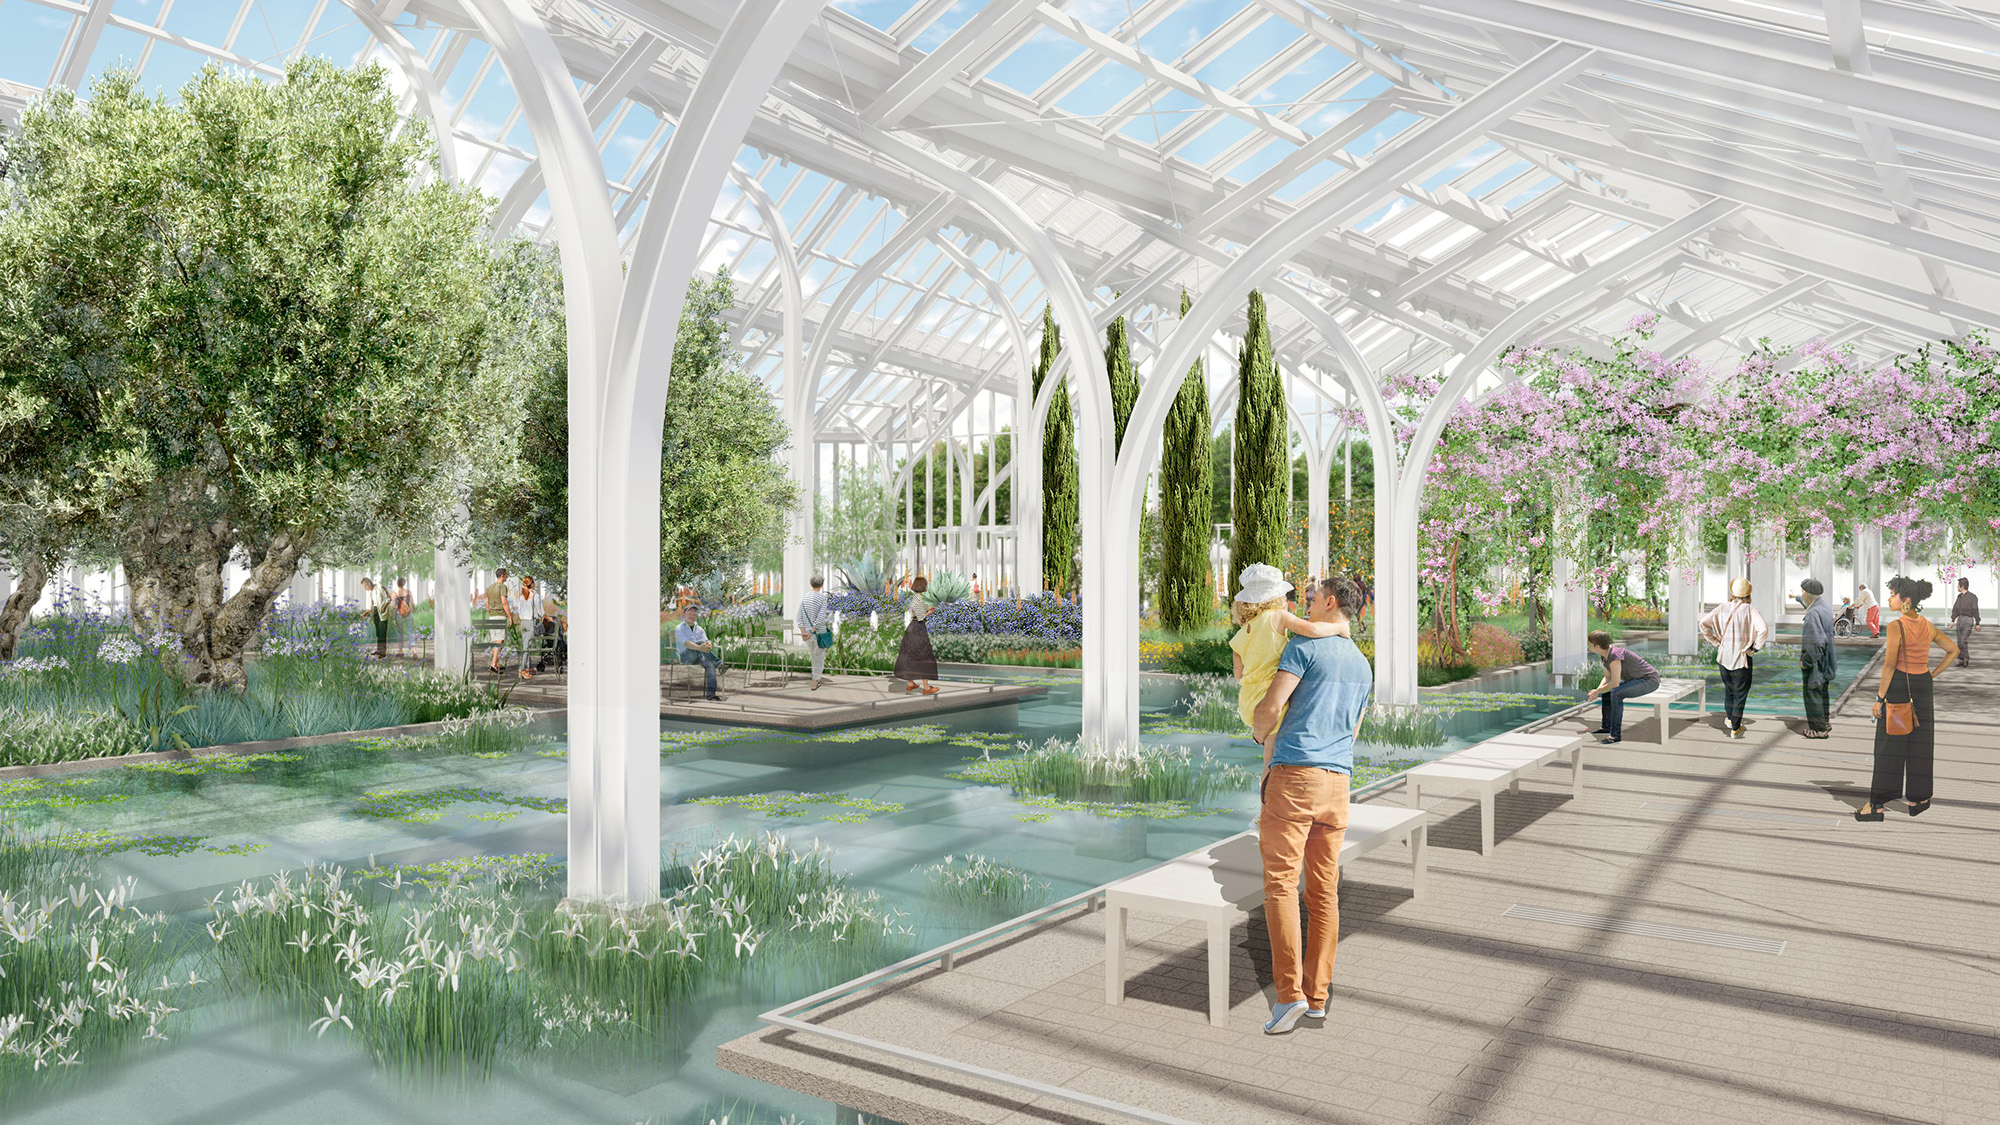 Rendering of people in conservatory